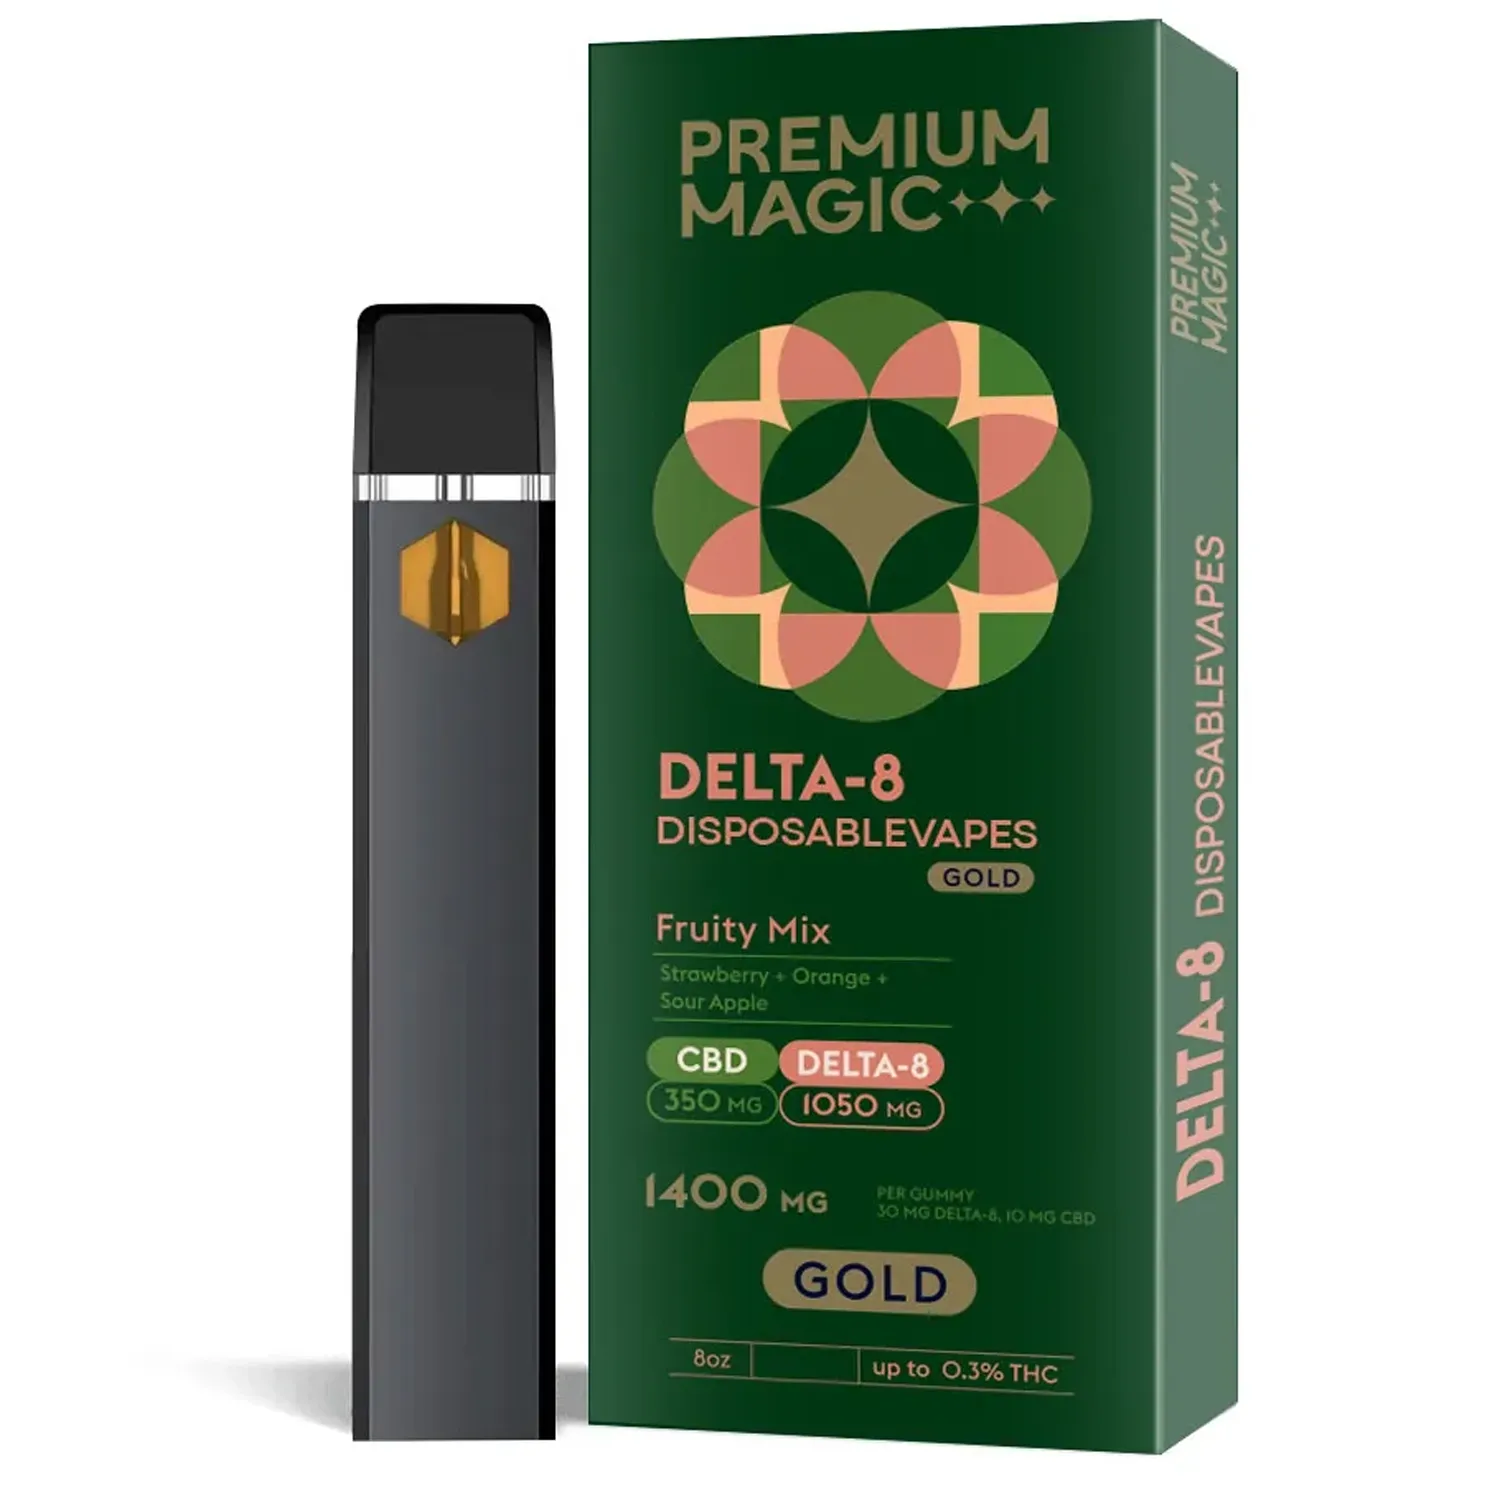 Delta-8 By Premium Magic cbd-Comprehensive Review of the Top Delta-8 Products